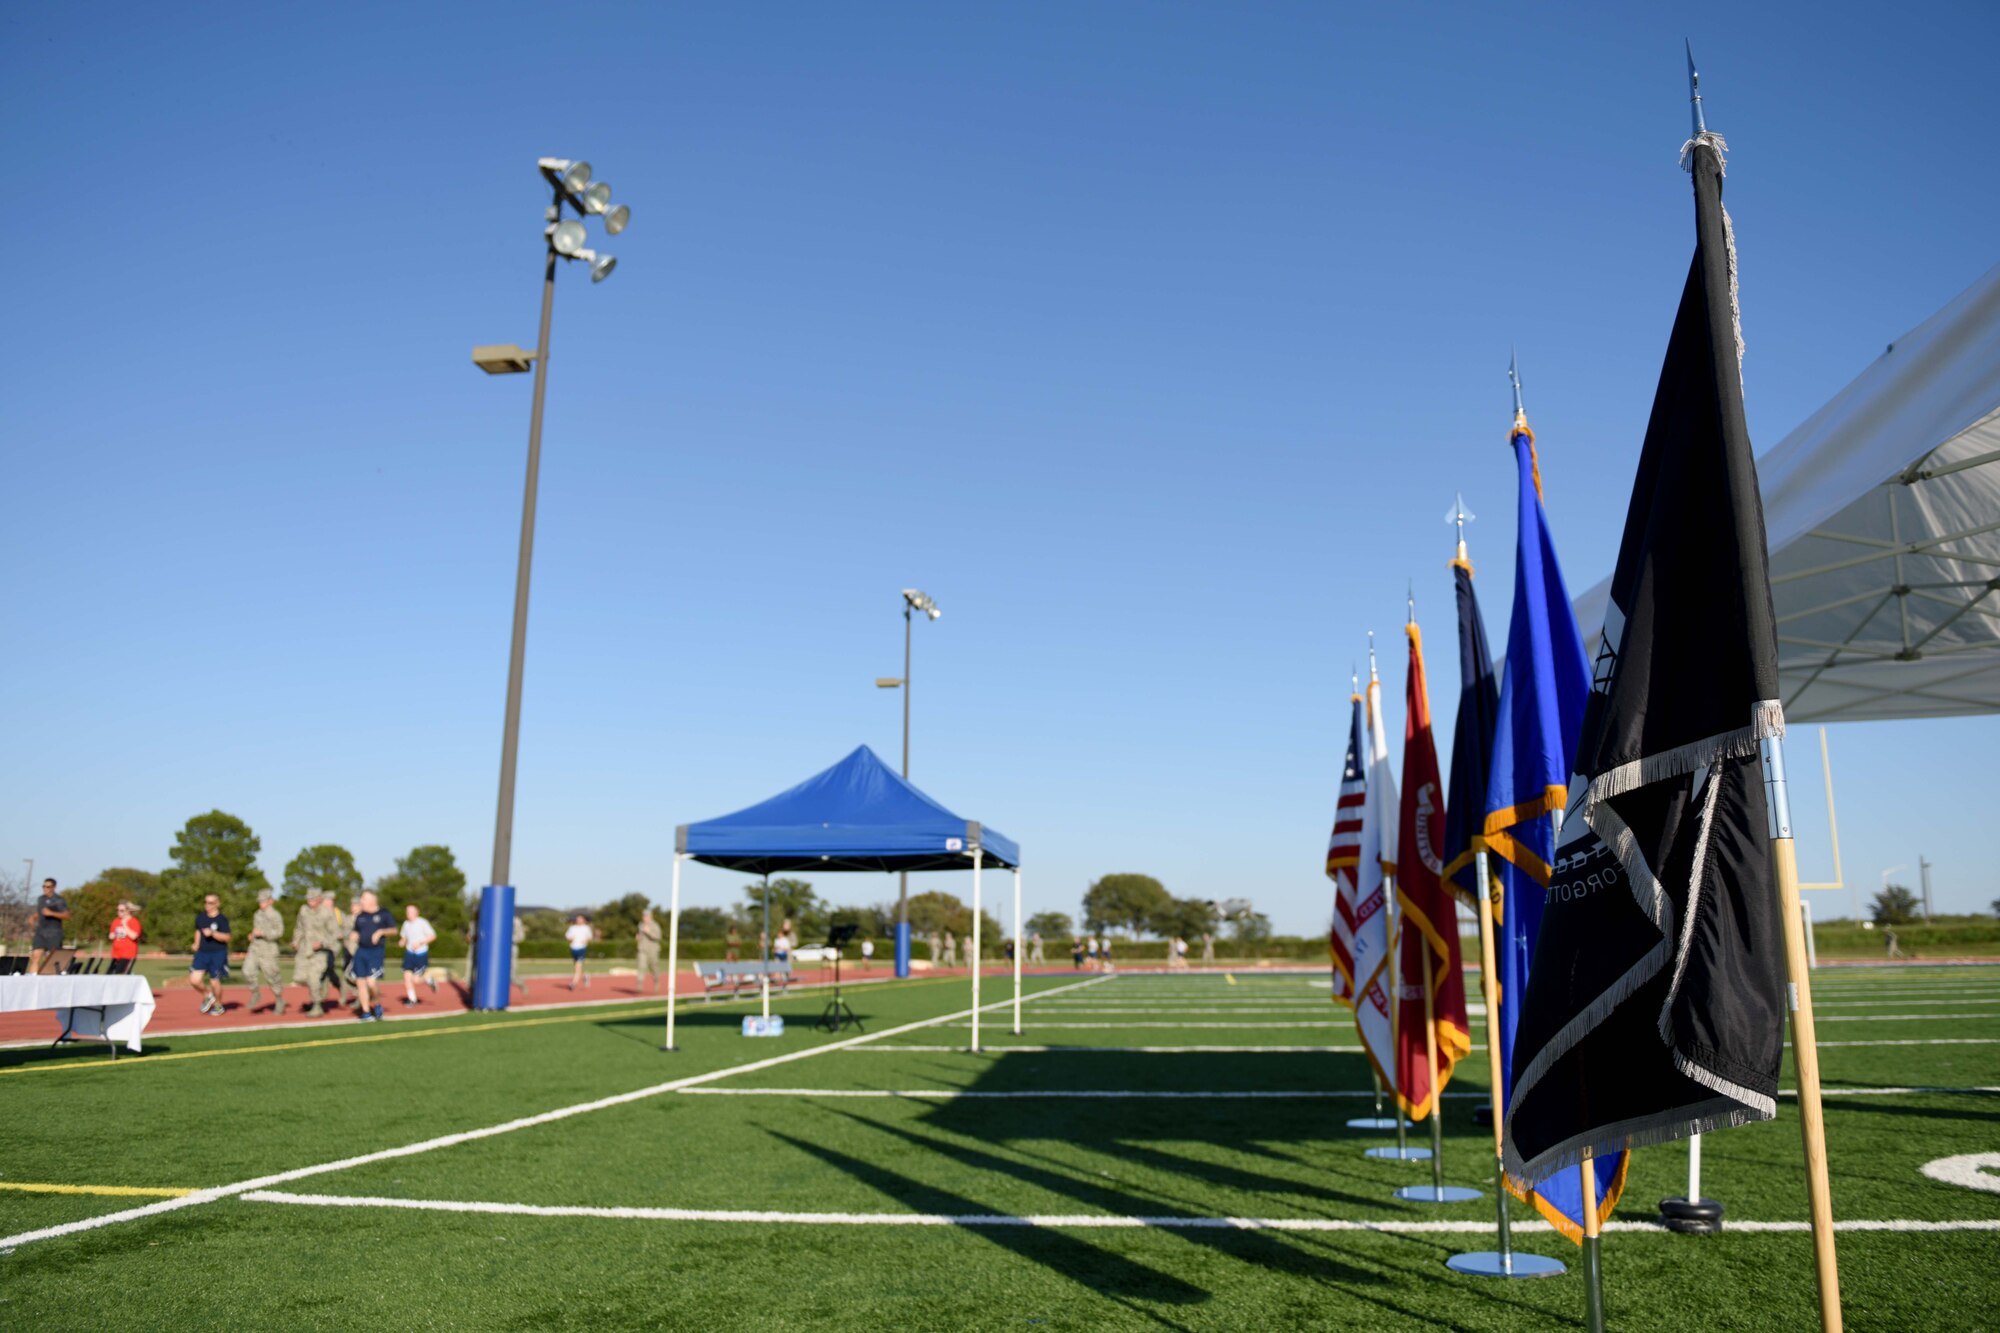 Participants run past the American flag, military service flags and a Prisoners of War and Missing in Action flag during the 24-hour Prisoners of War and Missing in Action Vigil at the track on Goodfellow Air Force Base, Texas, Oct. 26, 2018. Congress ordered prominent display of the POW/MIA flag on POW/MIA Recognition Day and several other national observances, including Armed Forces Day, Memorial Day, Flag Day, Independence Day and Veterans Day. (U.S. Air Force photo by Senior Airman Randall Moose/Released)